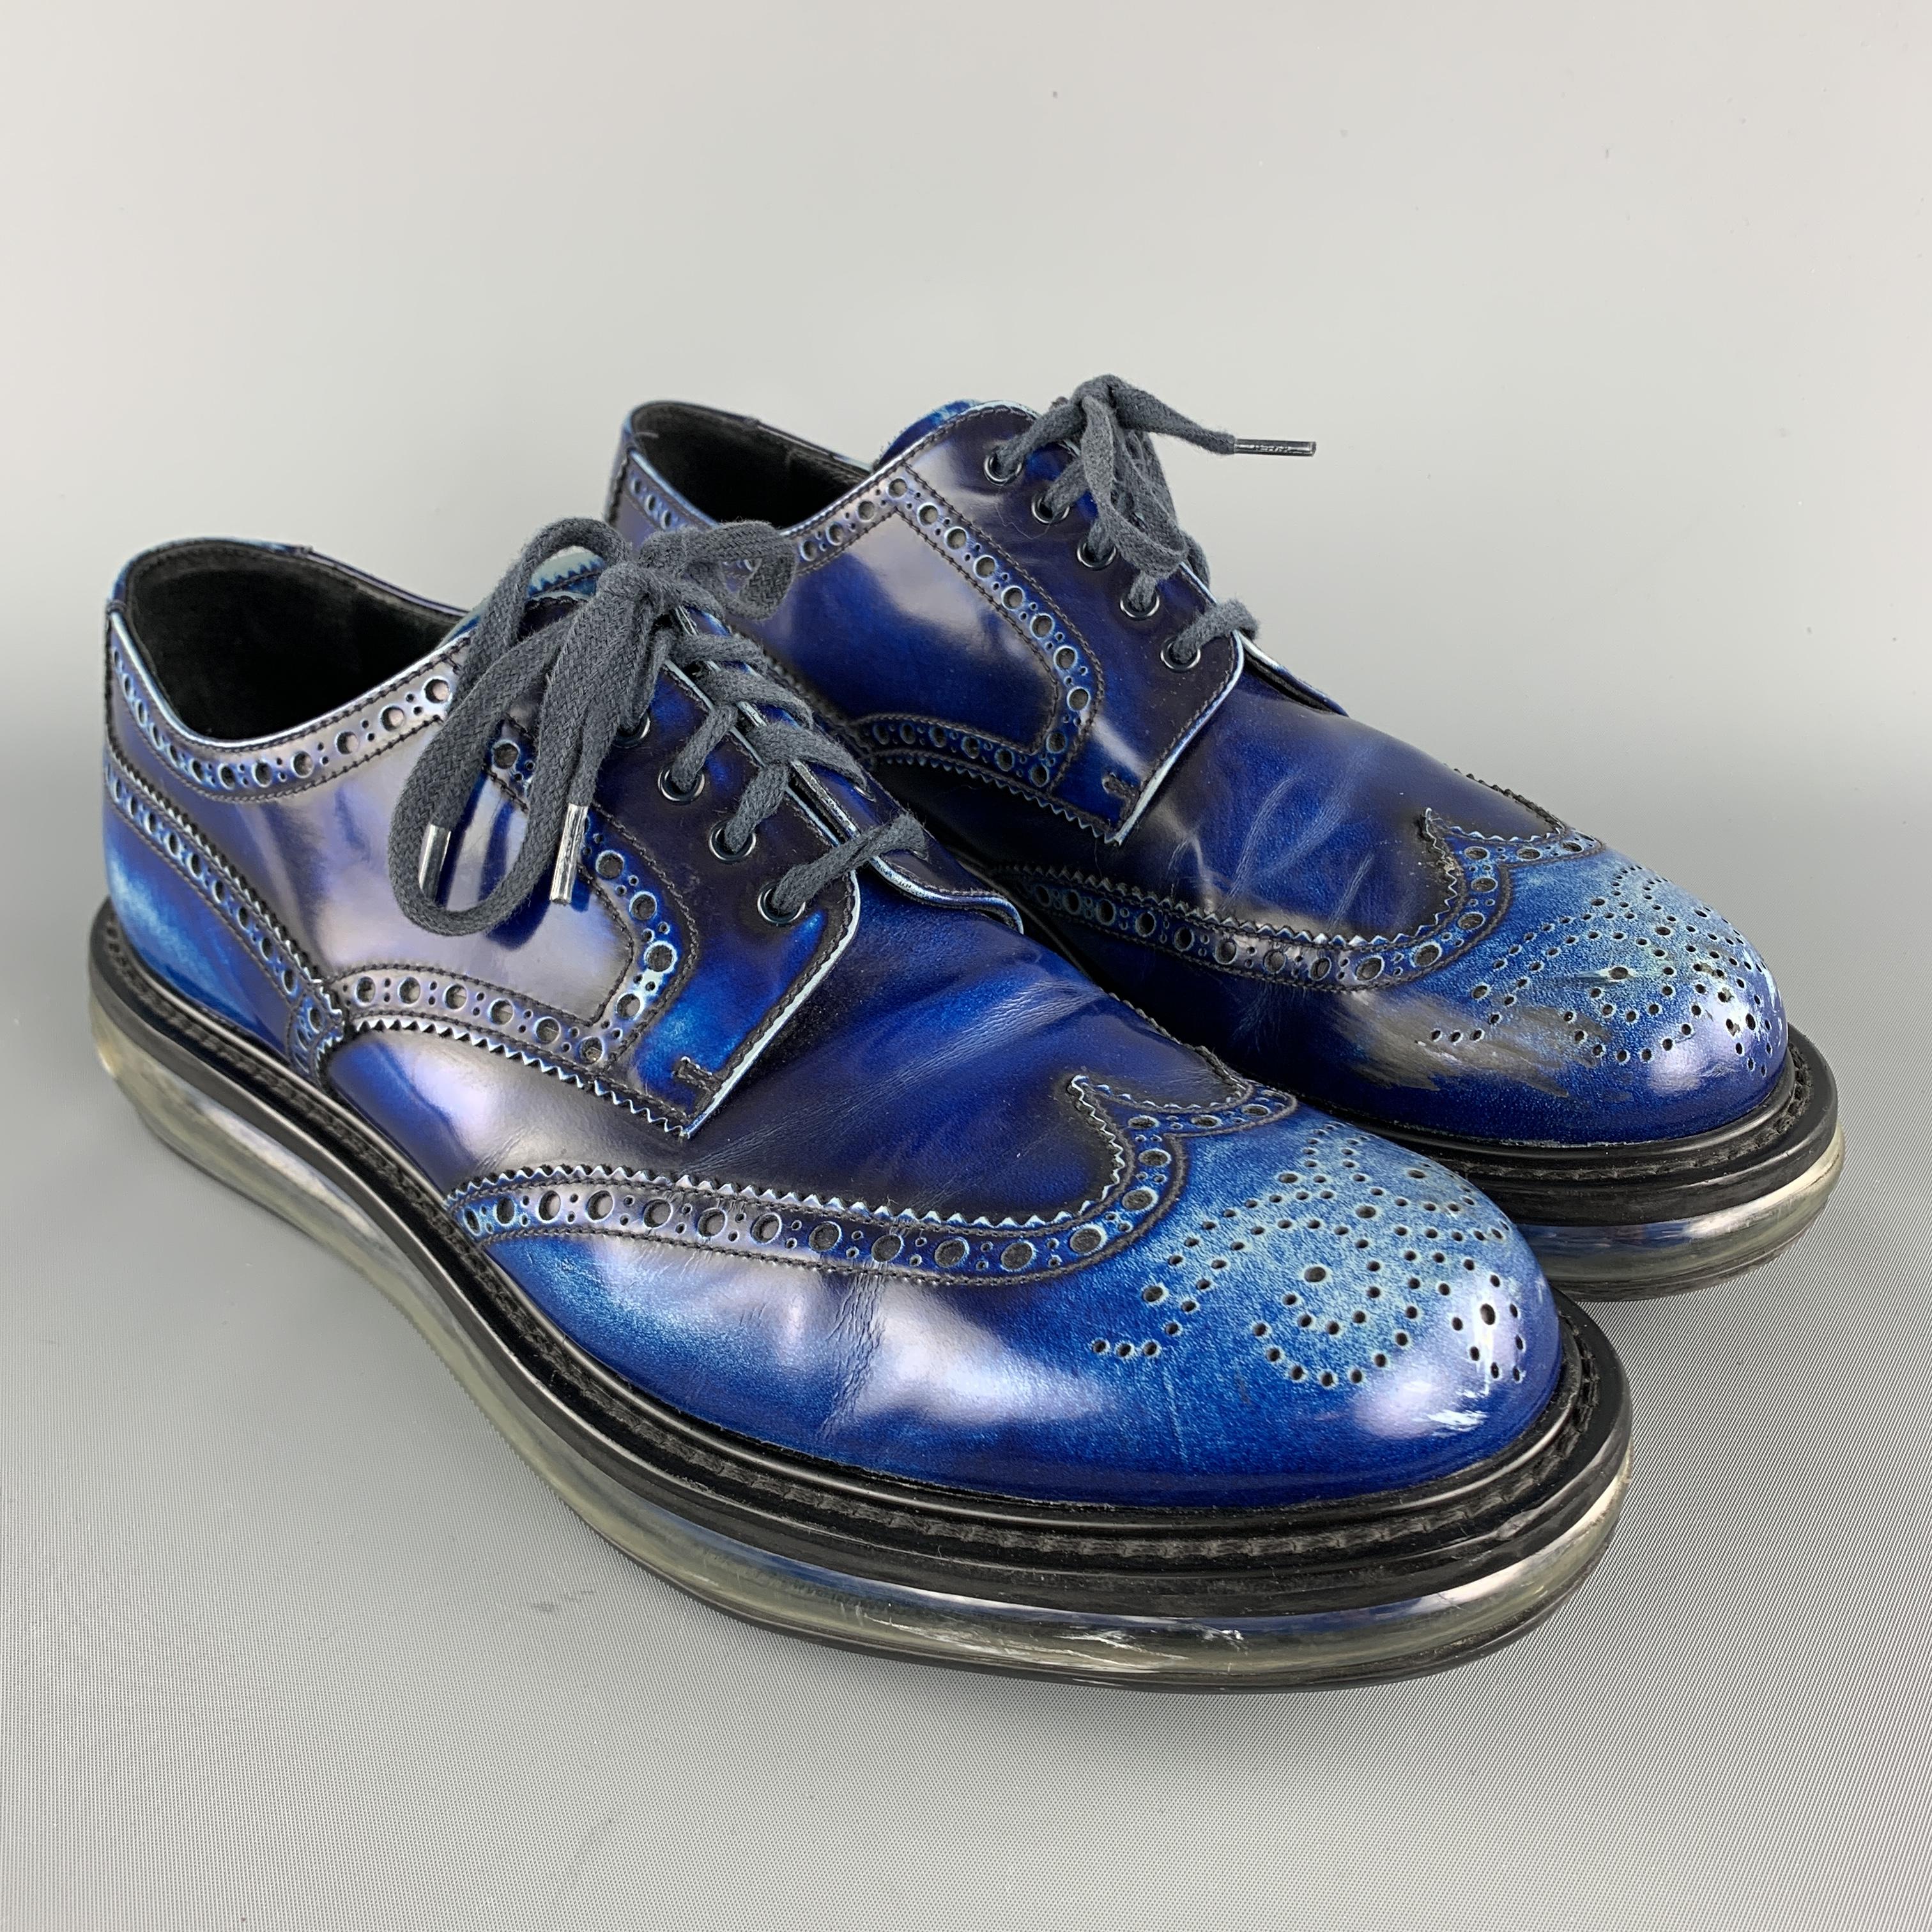 PRADA oxford lace up shoes comes in an electric blue tone in leather material, featuring an antique style, wingtip, a branded insole and a transparent sole. As is. Made in Italy.

Very Good Pre-Owned Condition.
Marked: UK 9.5  2EE 098

Outsole: 13 x